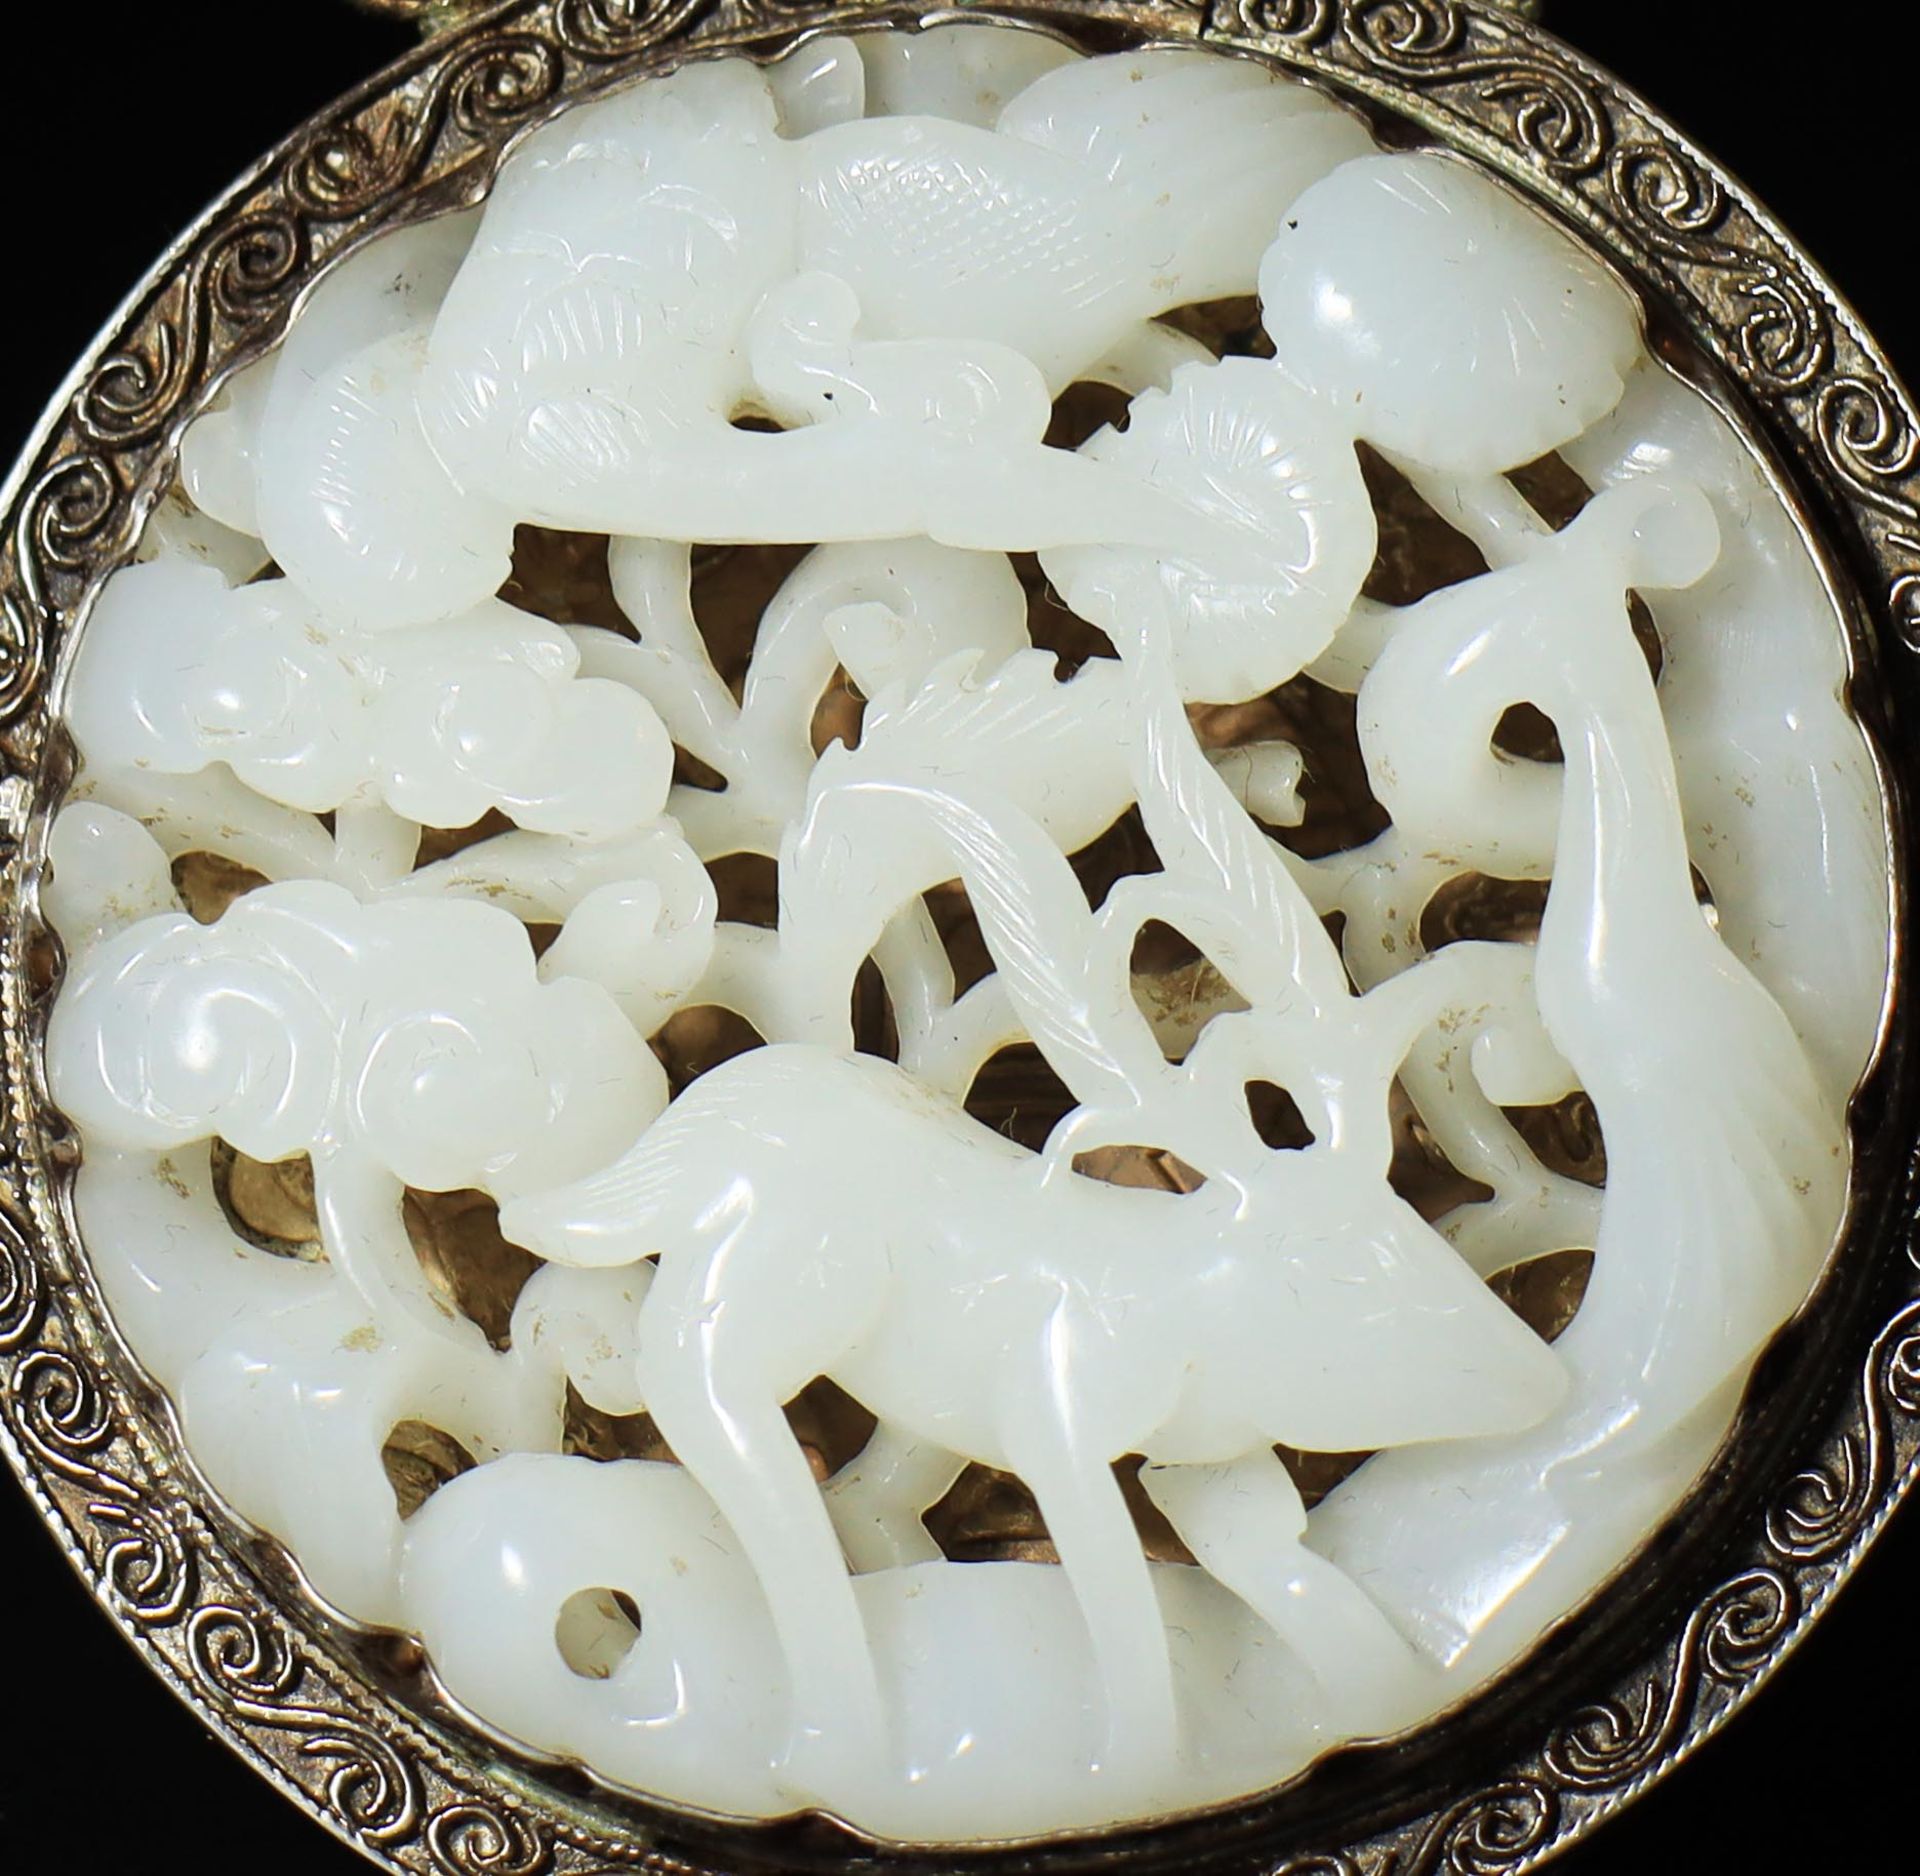 A silver-wrapped jade pendant from the Qing Dynasty - Image 2 of 6